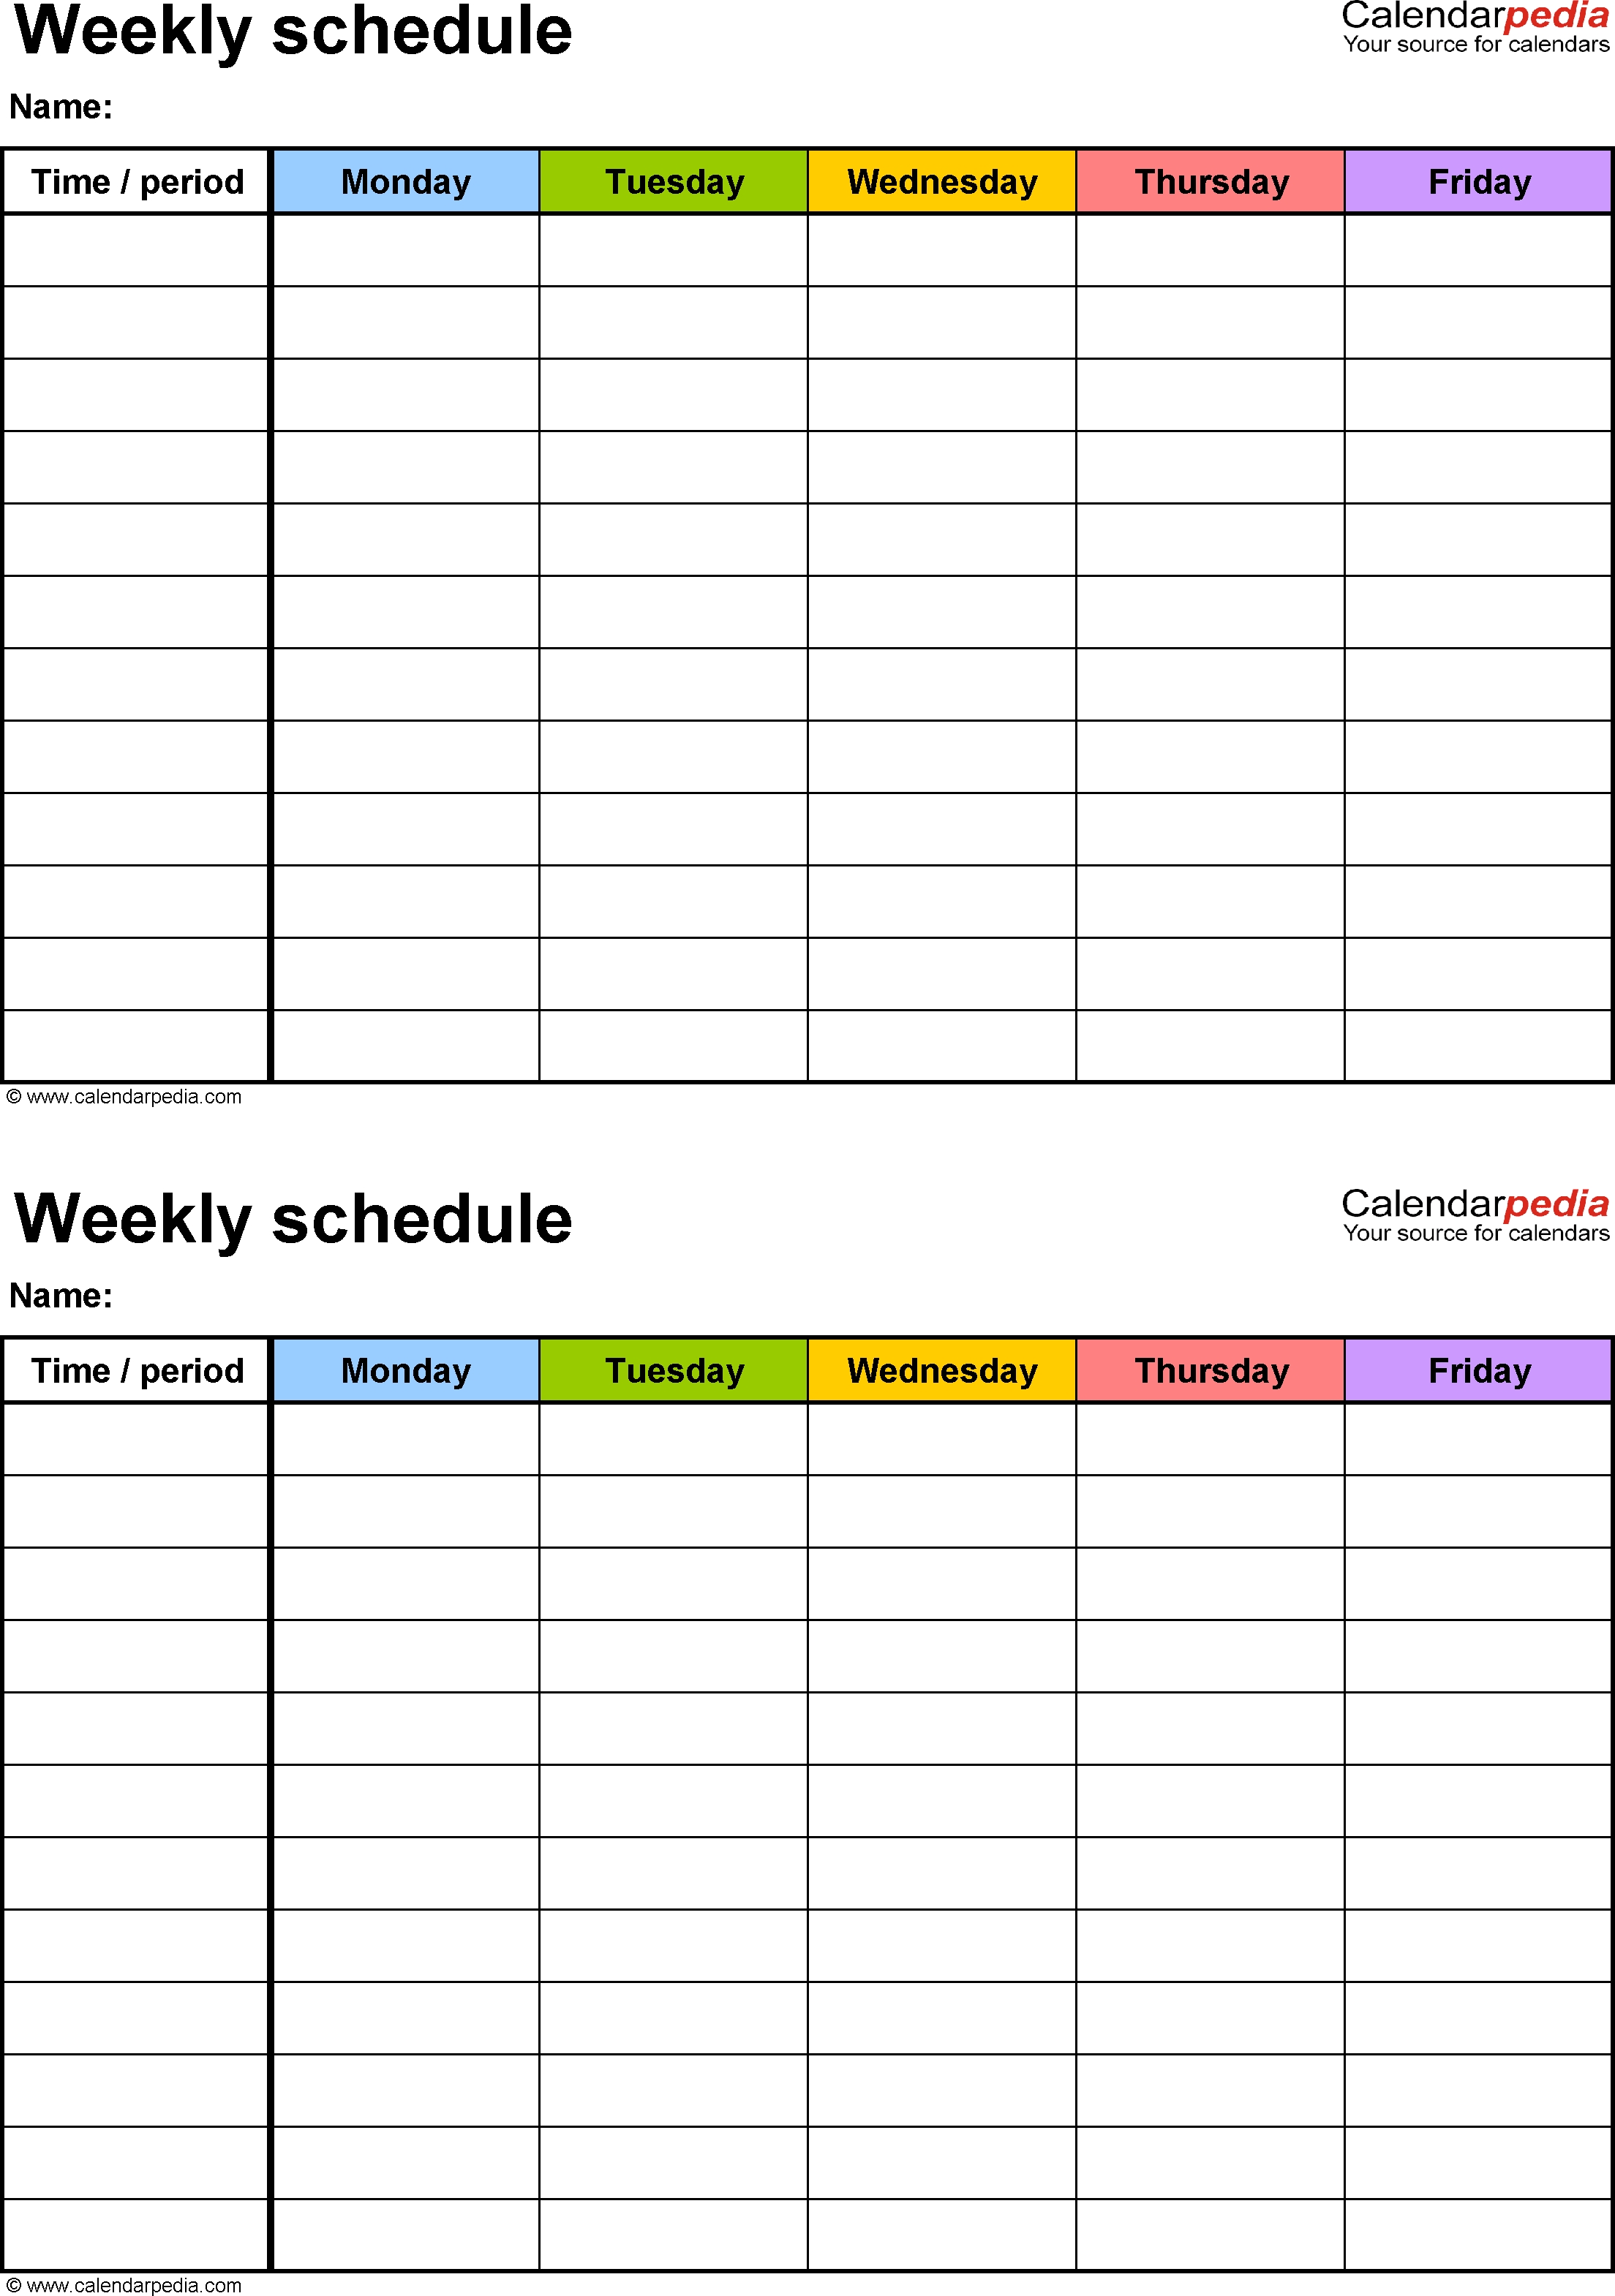 Free Weekly Schedule Templates For Word - 18 Templates with regard to 7 Day Employee Schedule Template